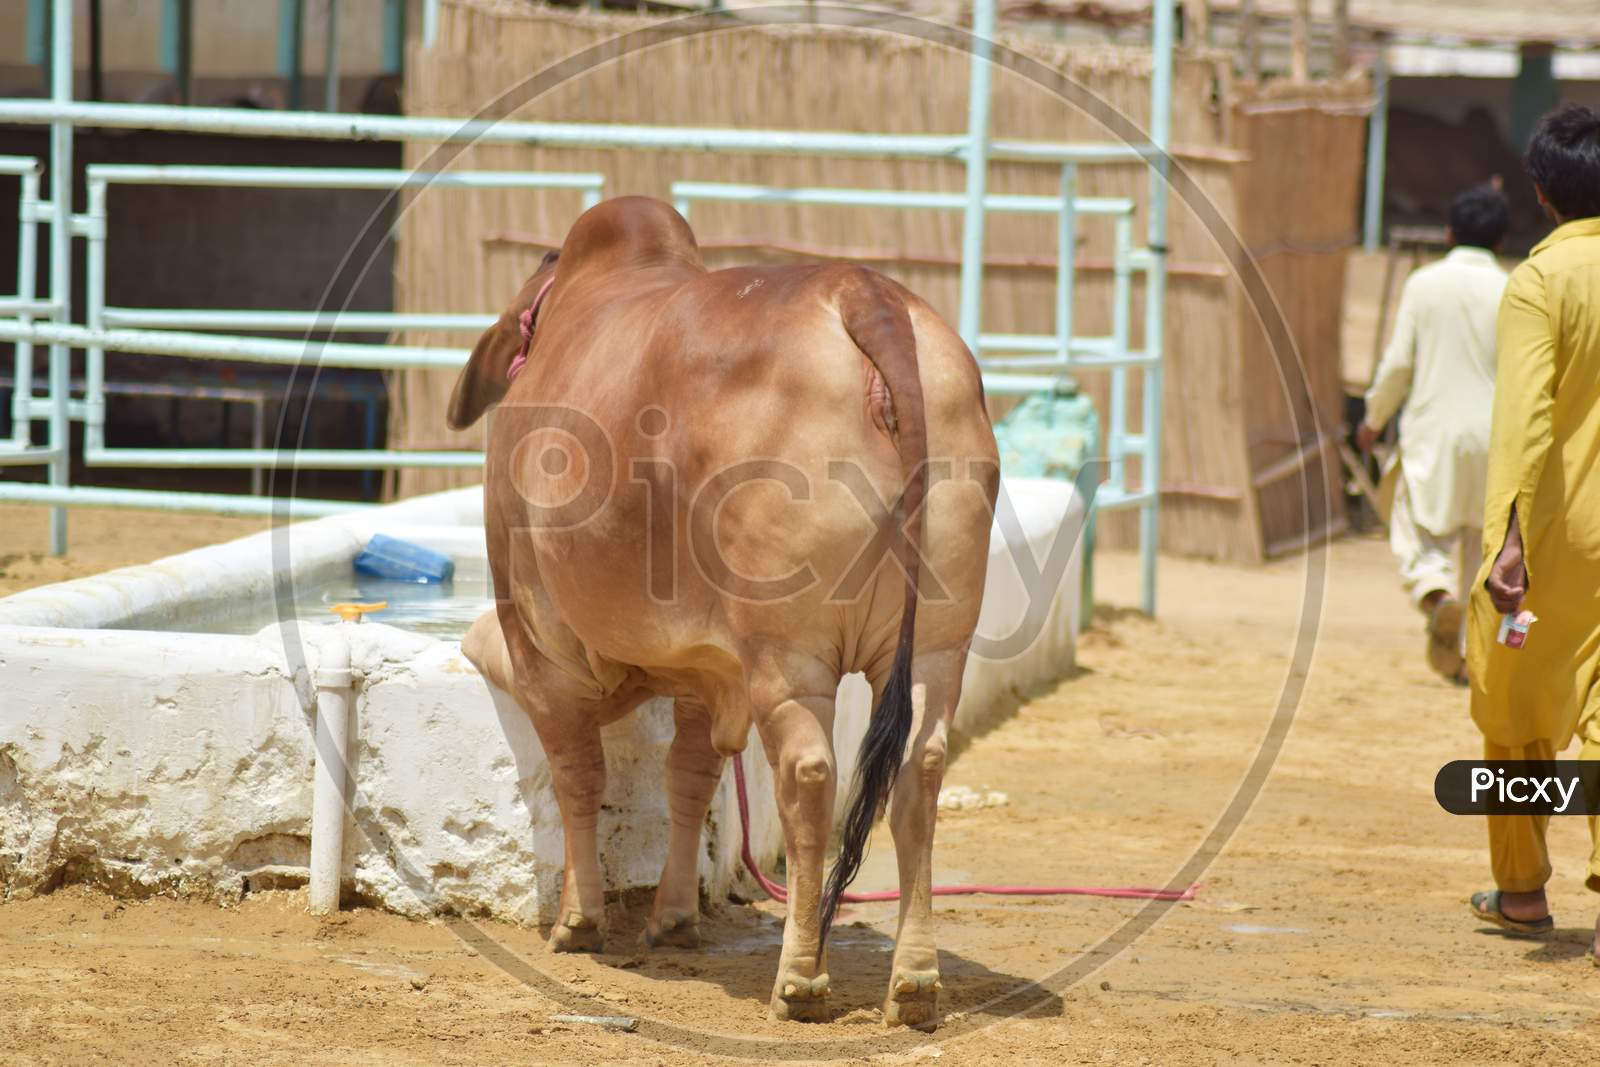 A Brown Bull drinking water in Cattle Farm